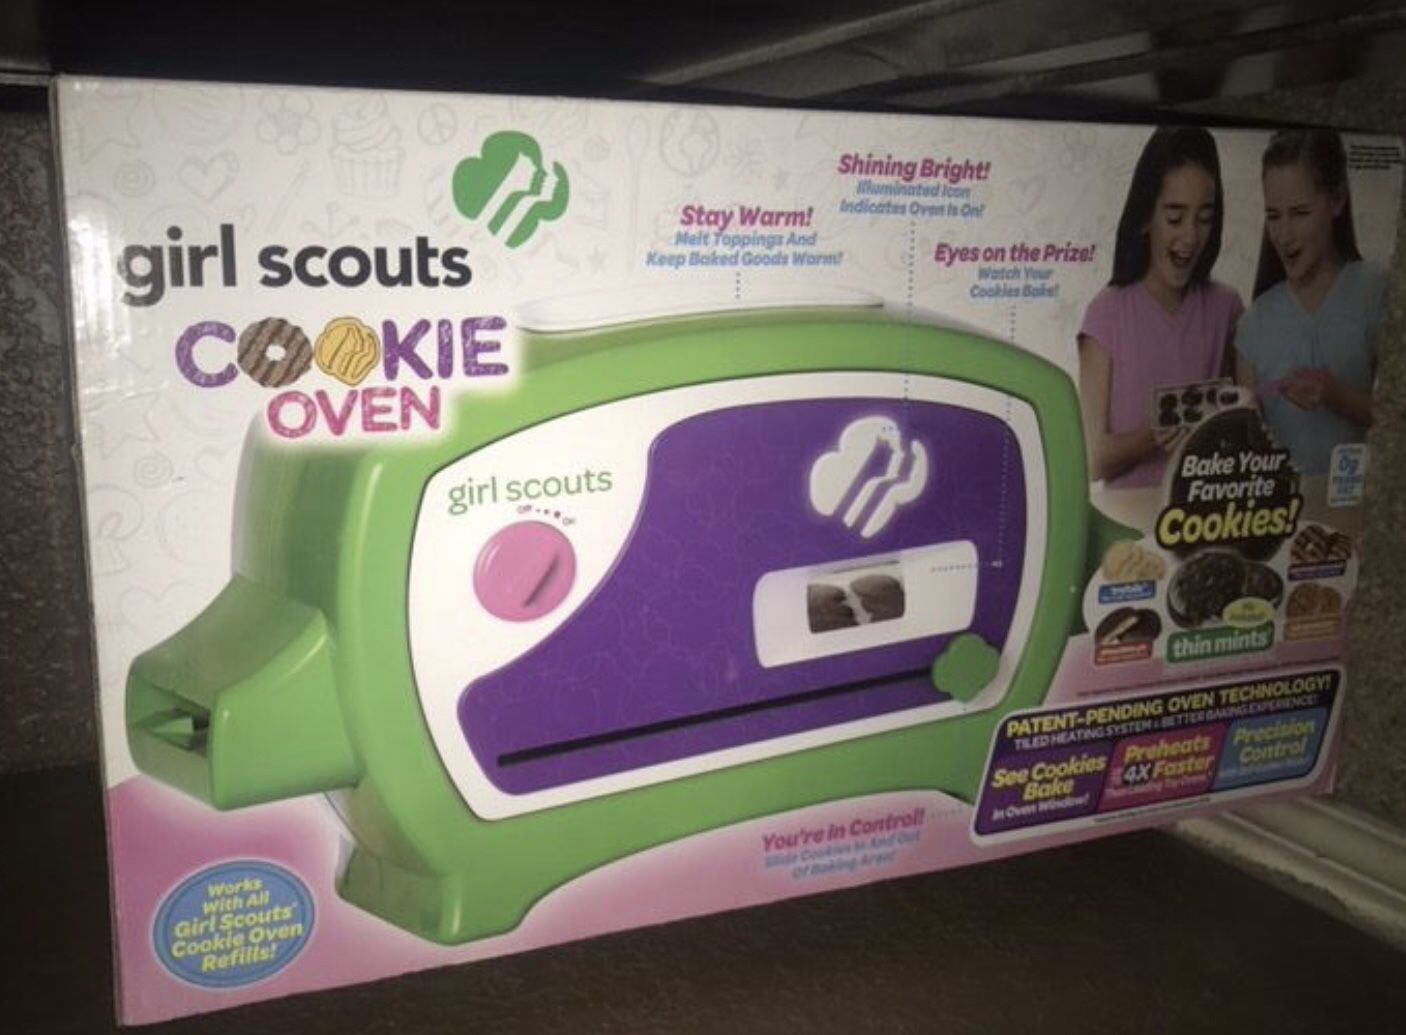 Girl Scouts cookies oven new